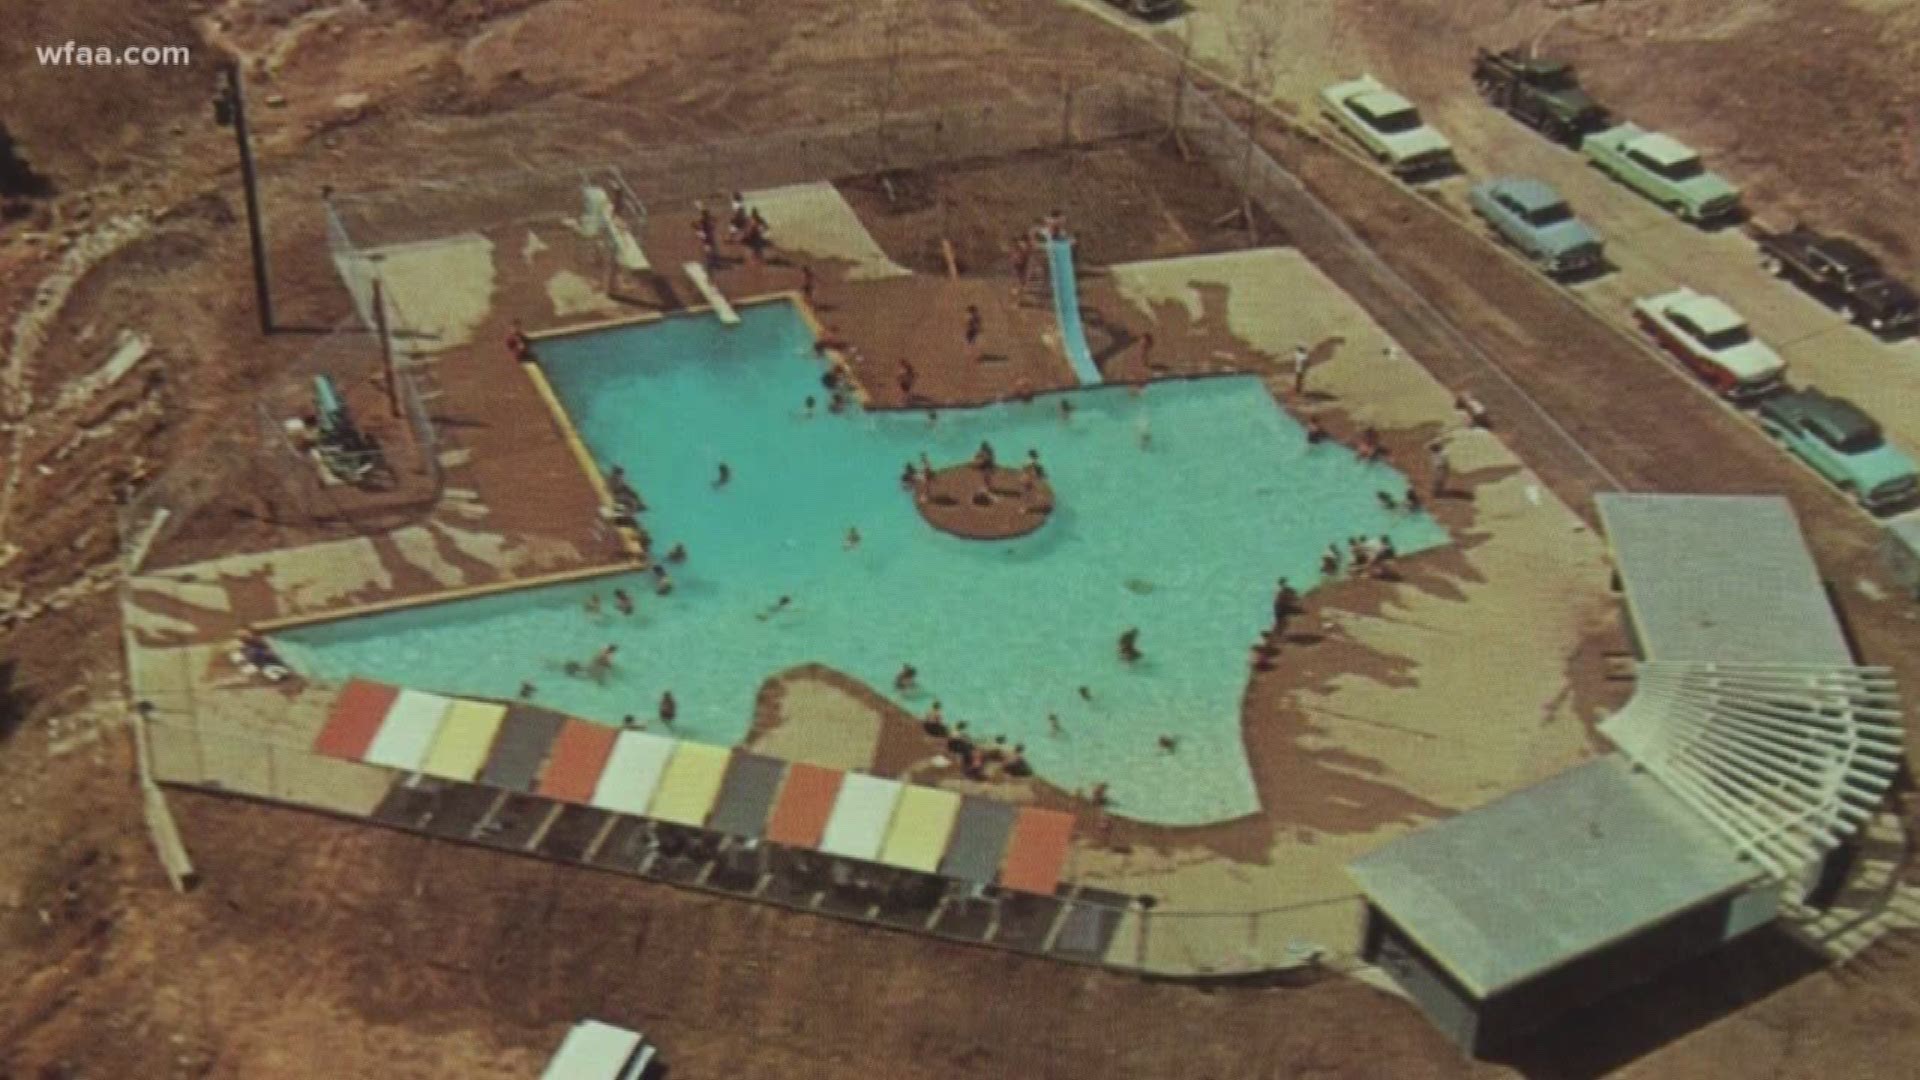 Repair crews discovered the original parts of the 1961 pool. The new updates came at a higher price tag than the foundation could afford.